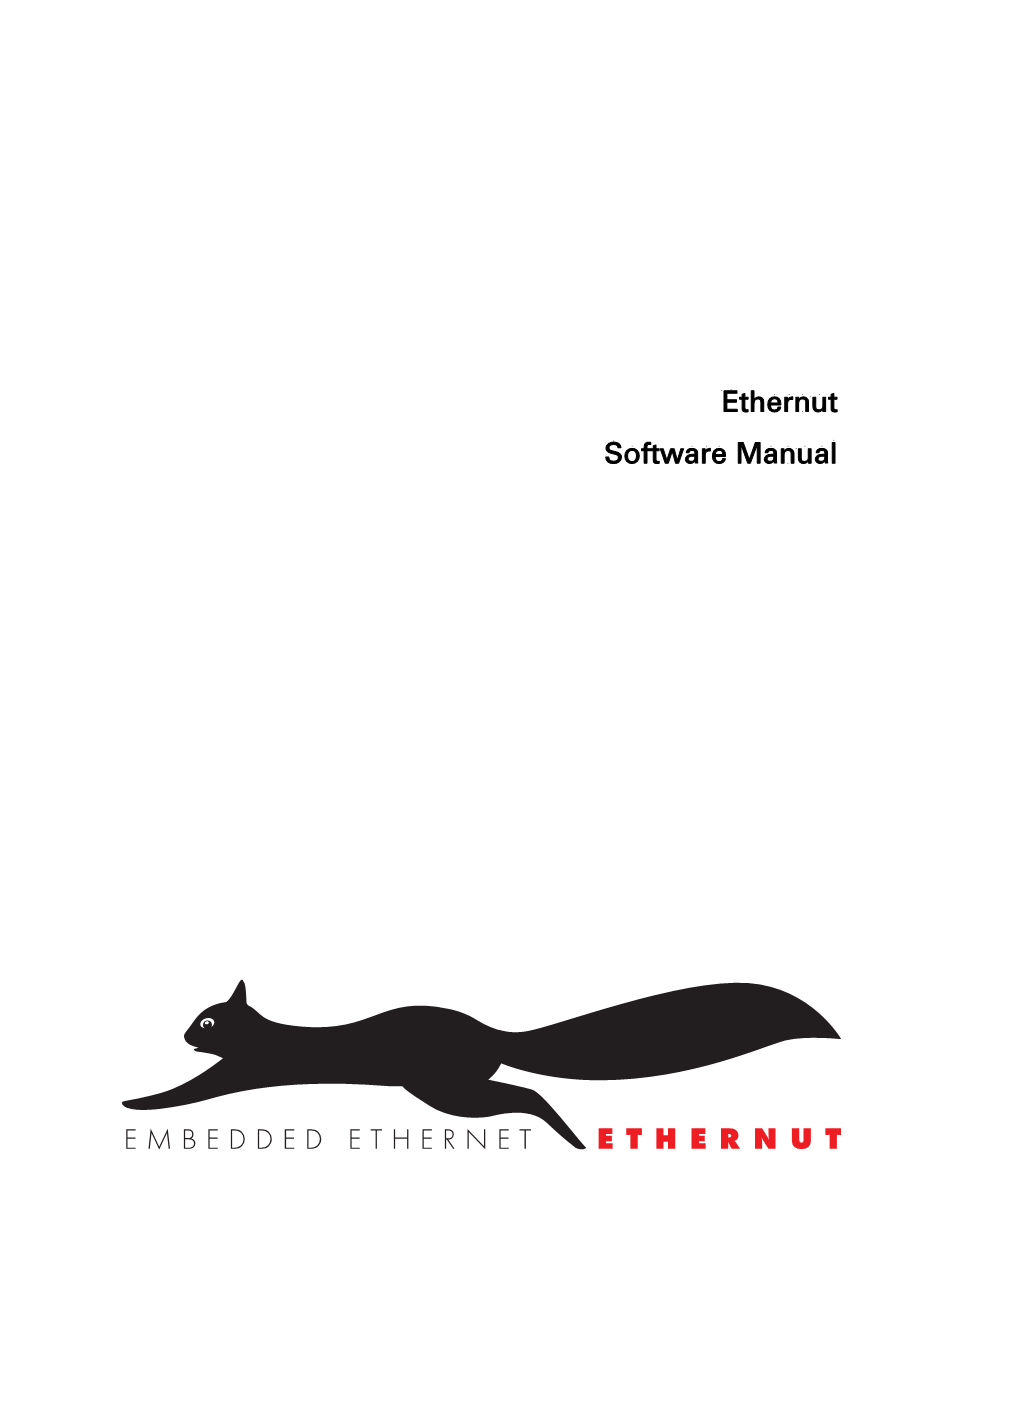 Ethernut Software Manual Manual Revision: 2.0 Issue Date: September 2004